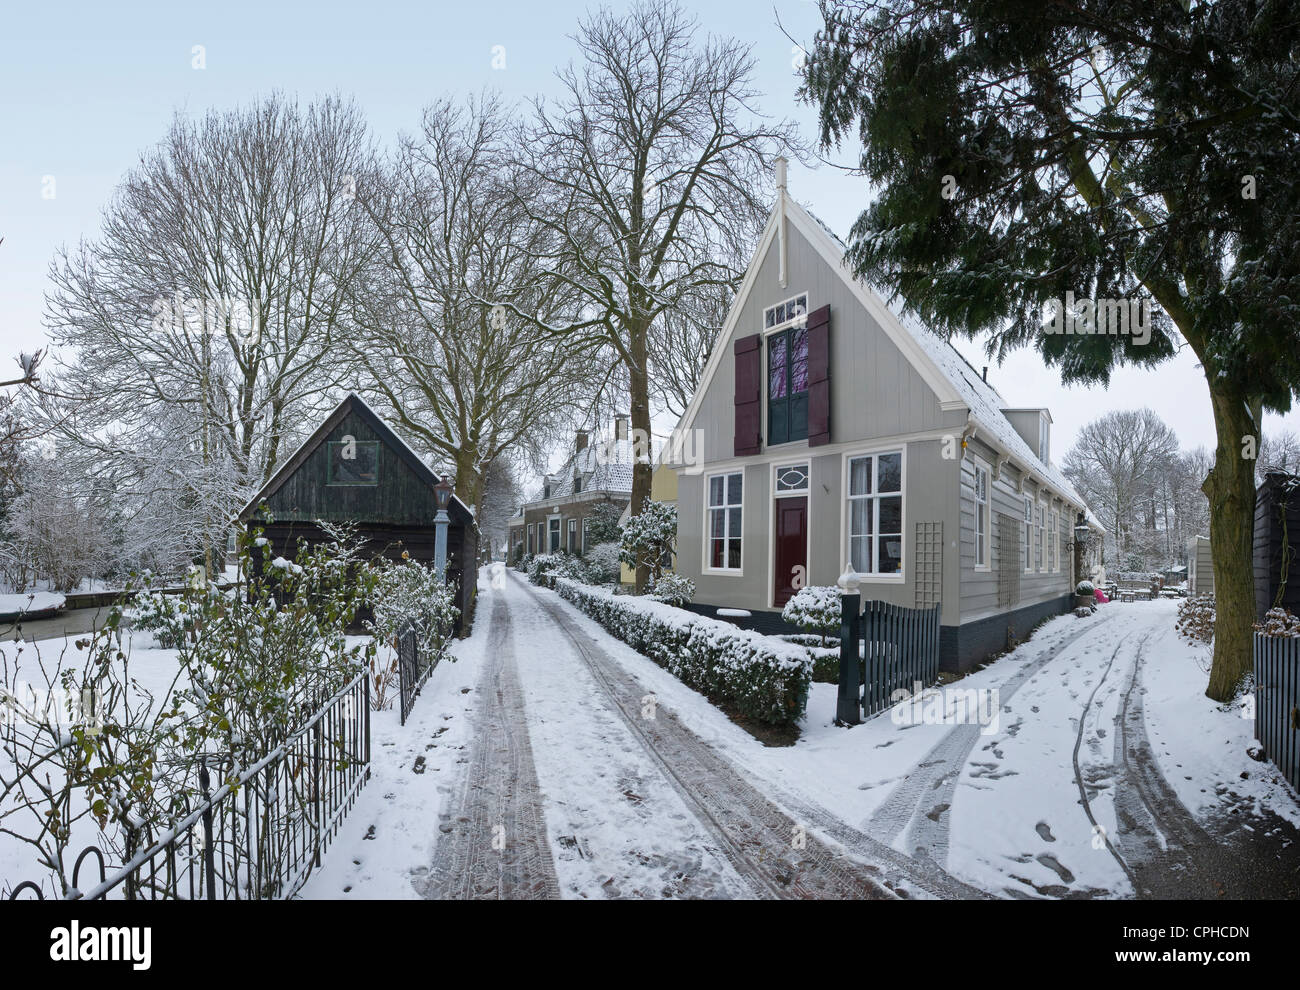 Netherlands, Holland, Europe, Broek in Waterland, House, Winter, Snow, Ice, Wooden houses Stock Photo